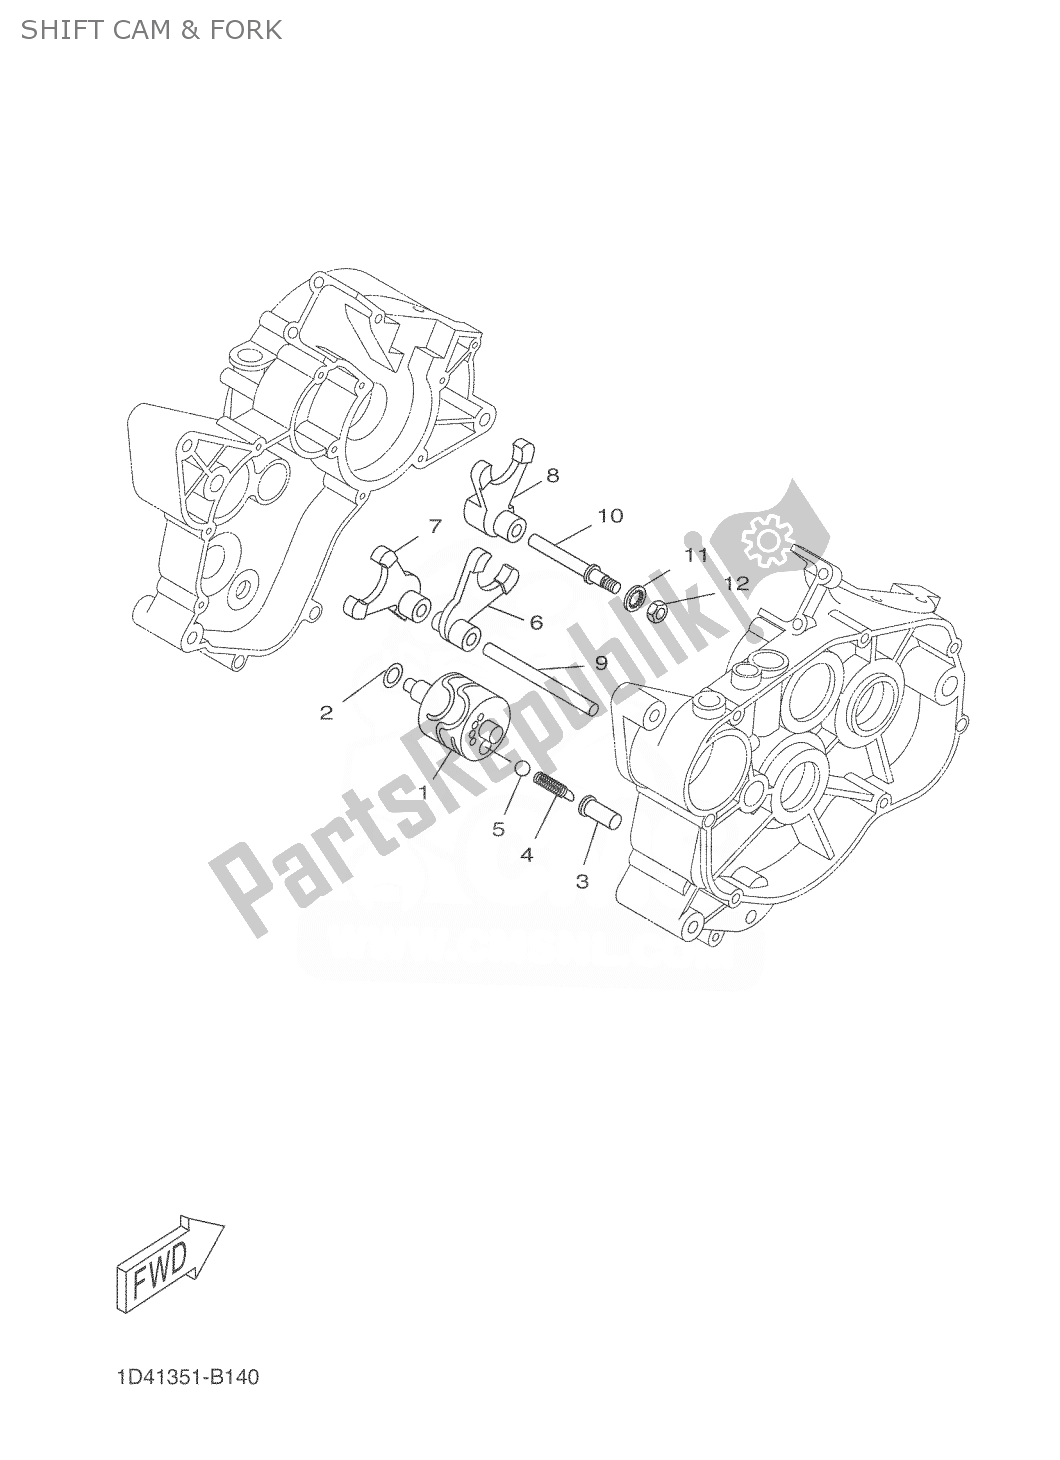 All parts for the Shift Cam & Fork of the Yamaha DT 50 2004